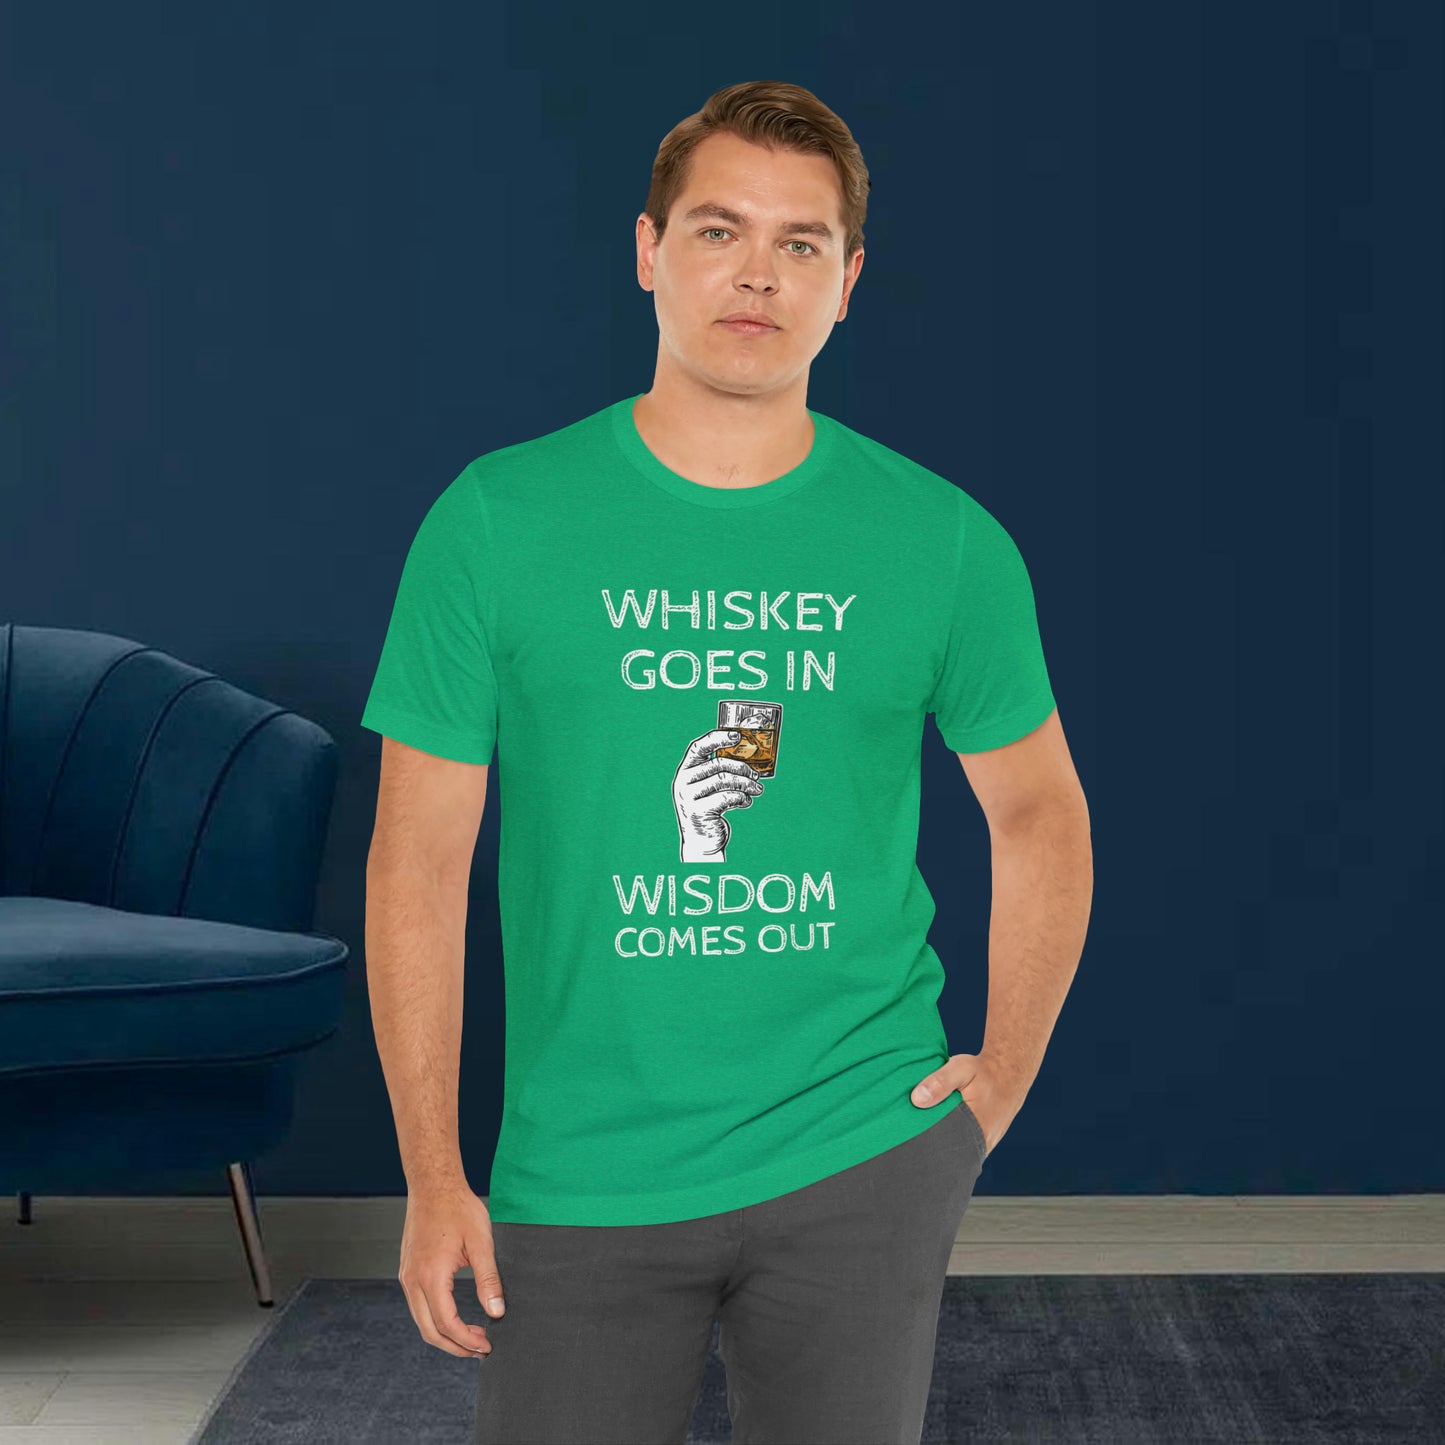 Whiskey Goes in Wisdom comes out Funny T-Shirt